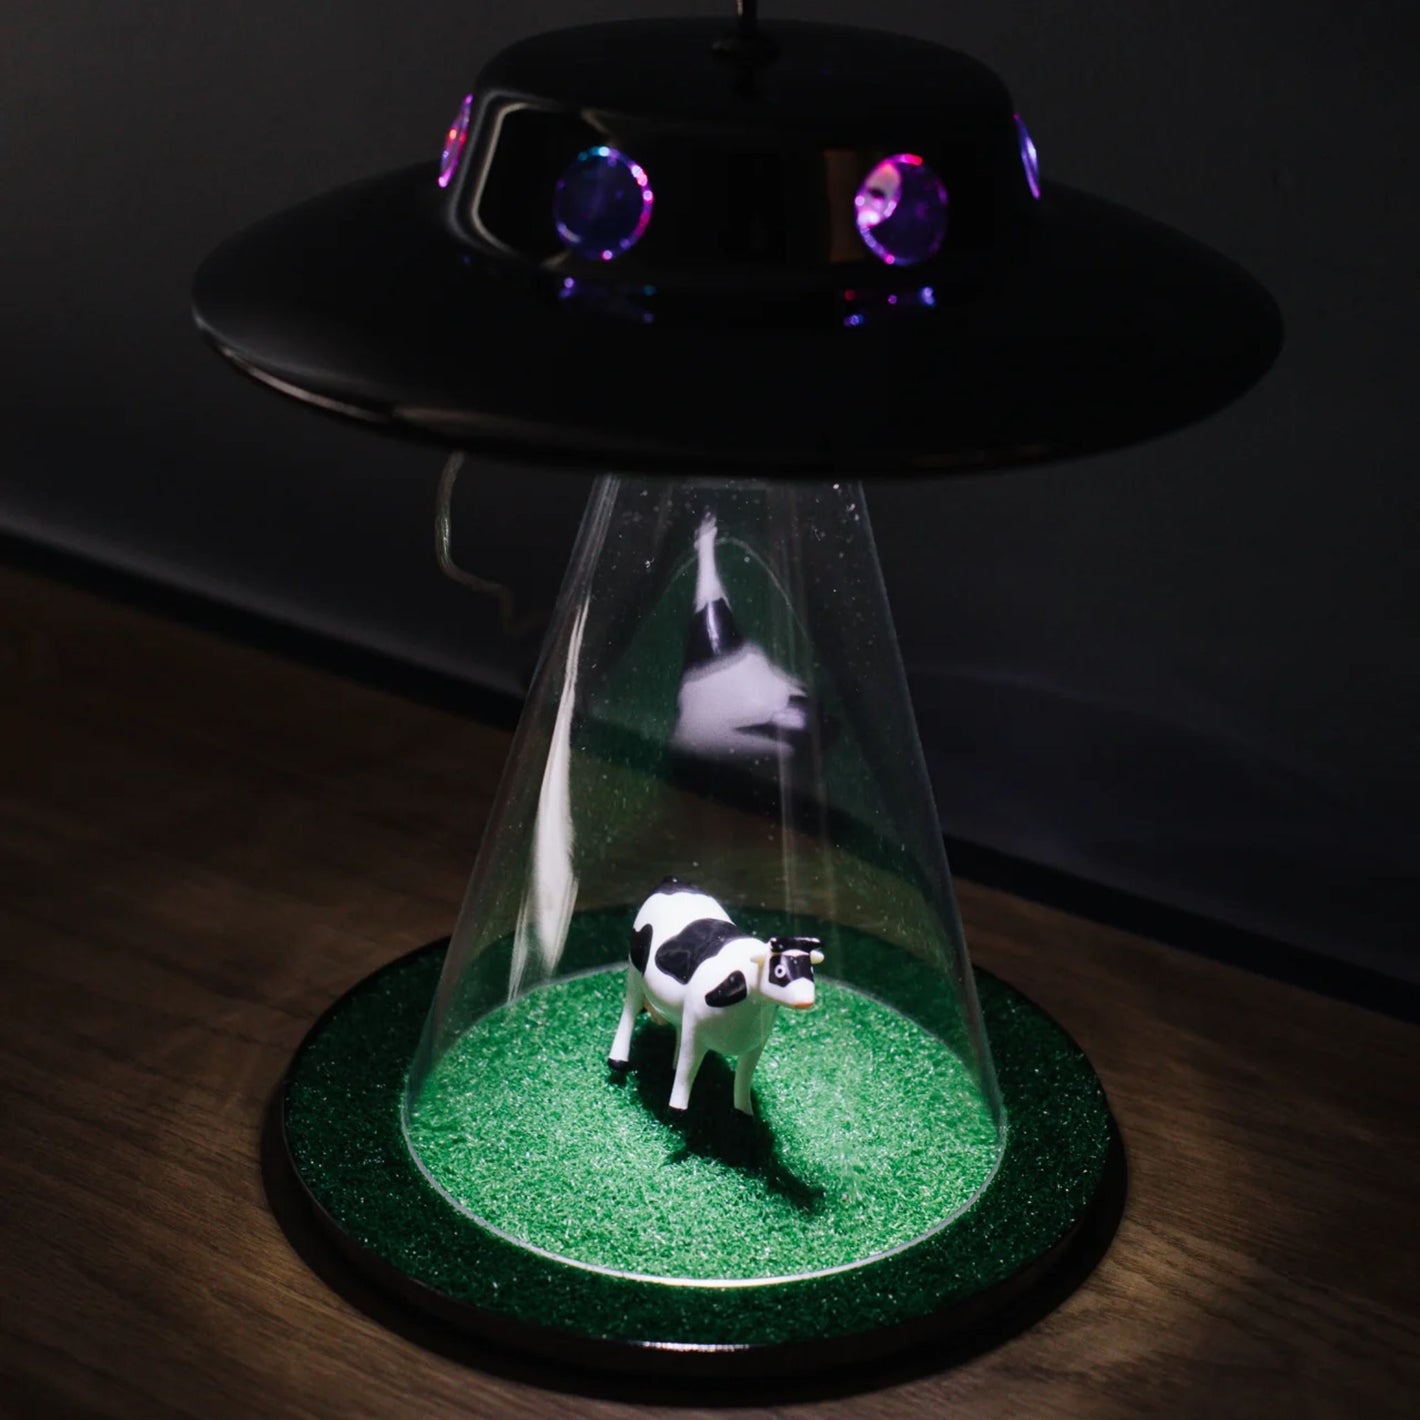 customer review 3 - Original UFO Cow Lamp & amazon alien abduction table desk lamp with grass, cow and flying UFO saucer LED RGB night light